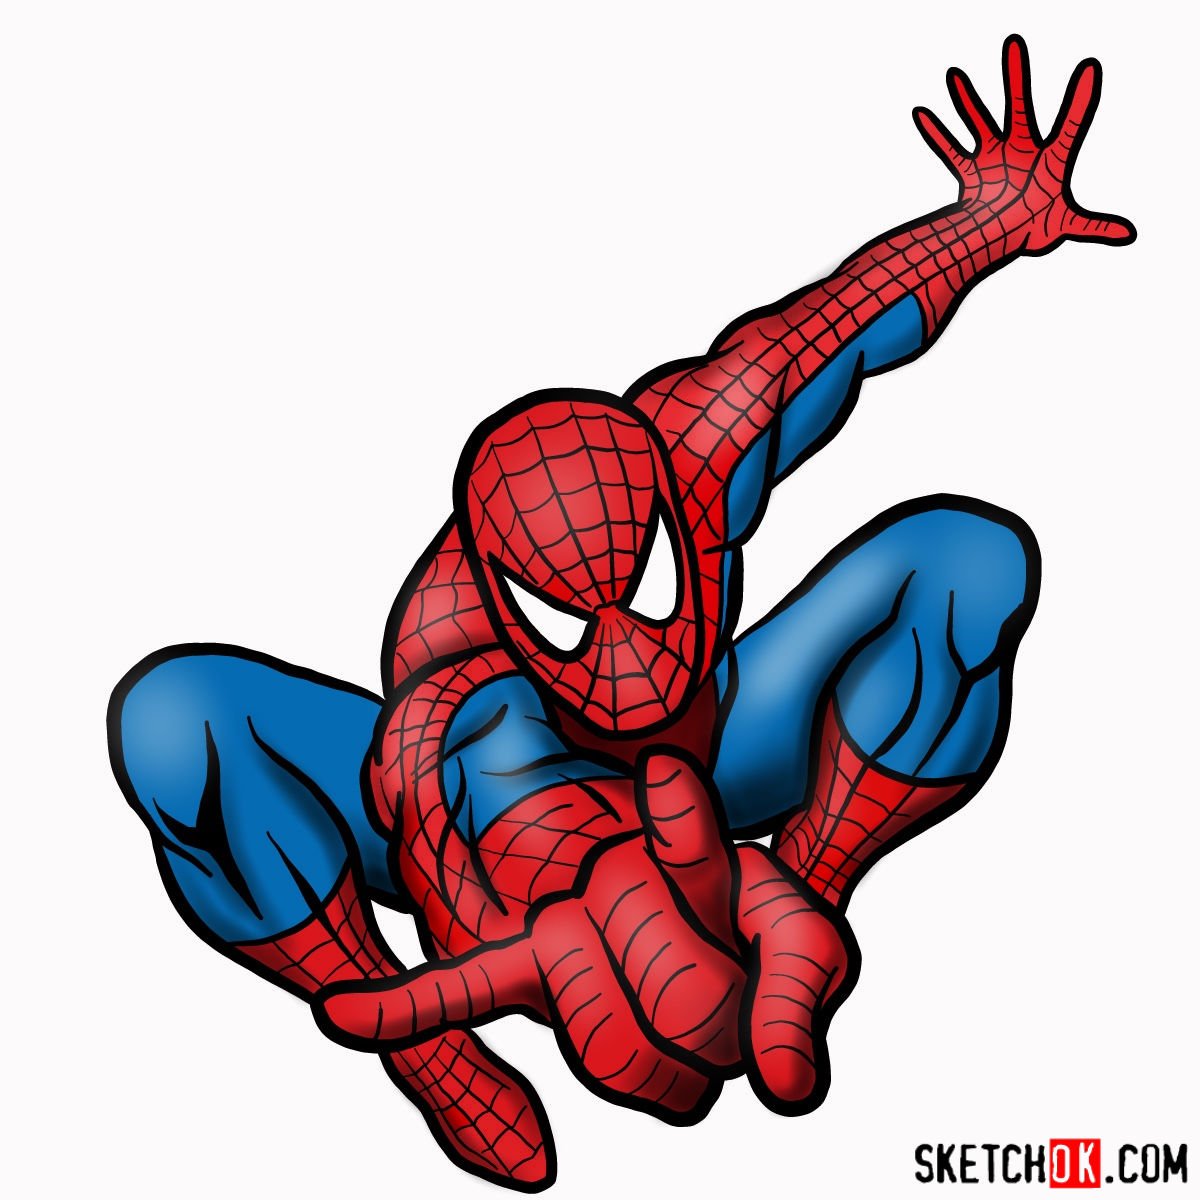 How to draw SpiderMan mask  Sketchok easy drawing guides